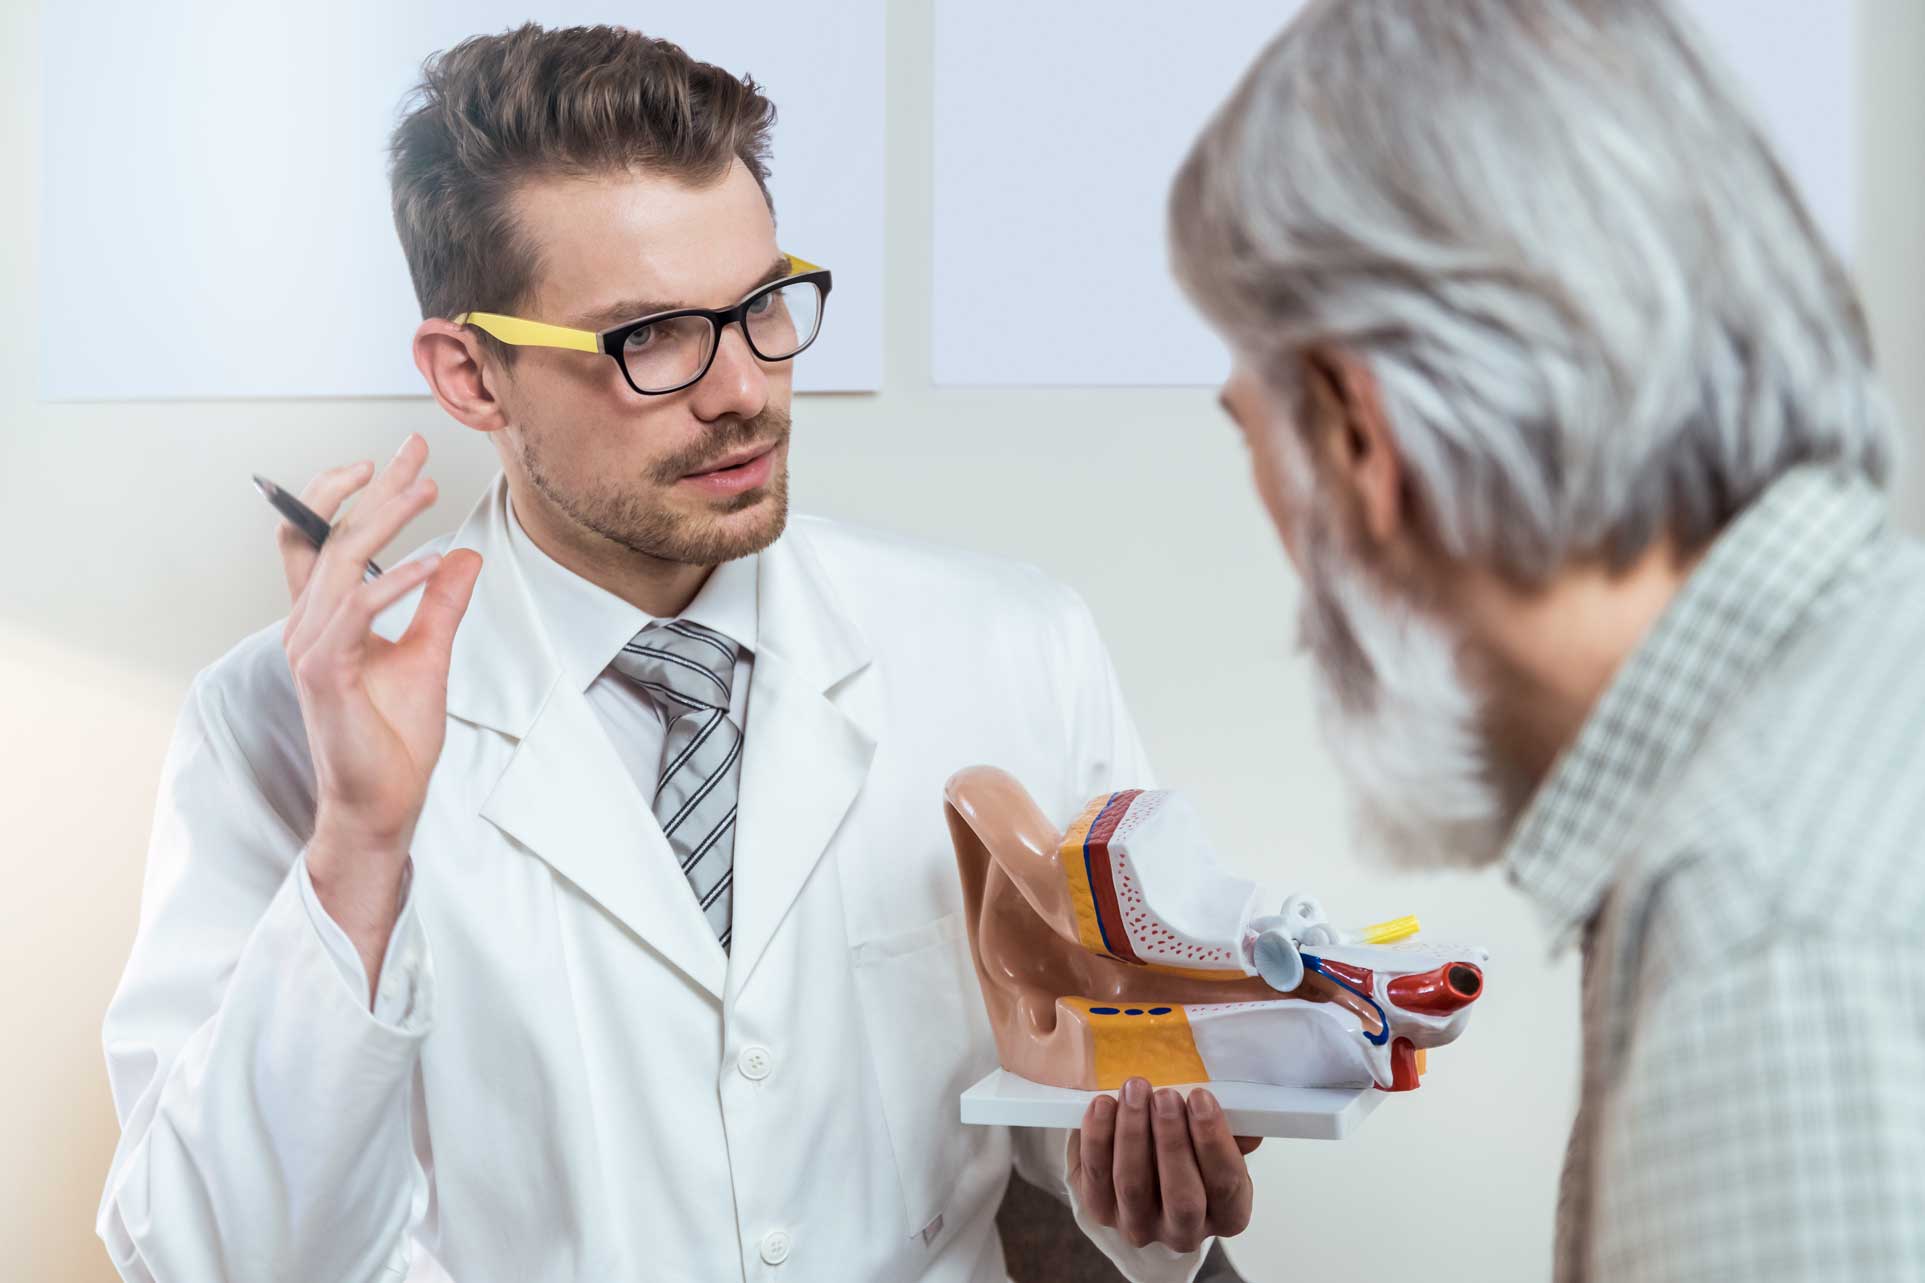 audiologist holding model of ear and talking to patient